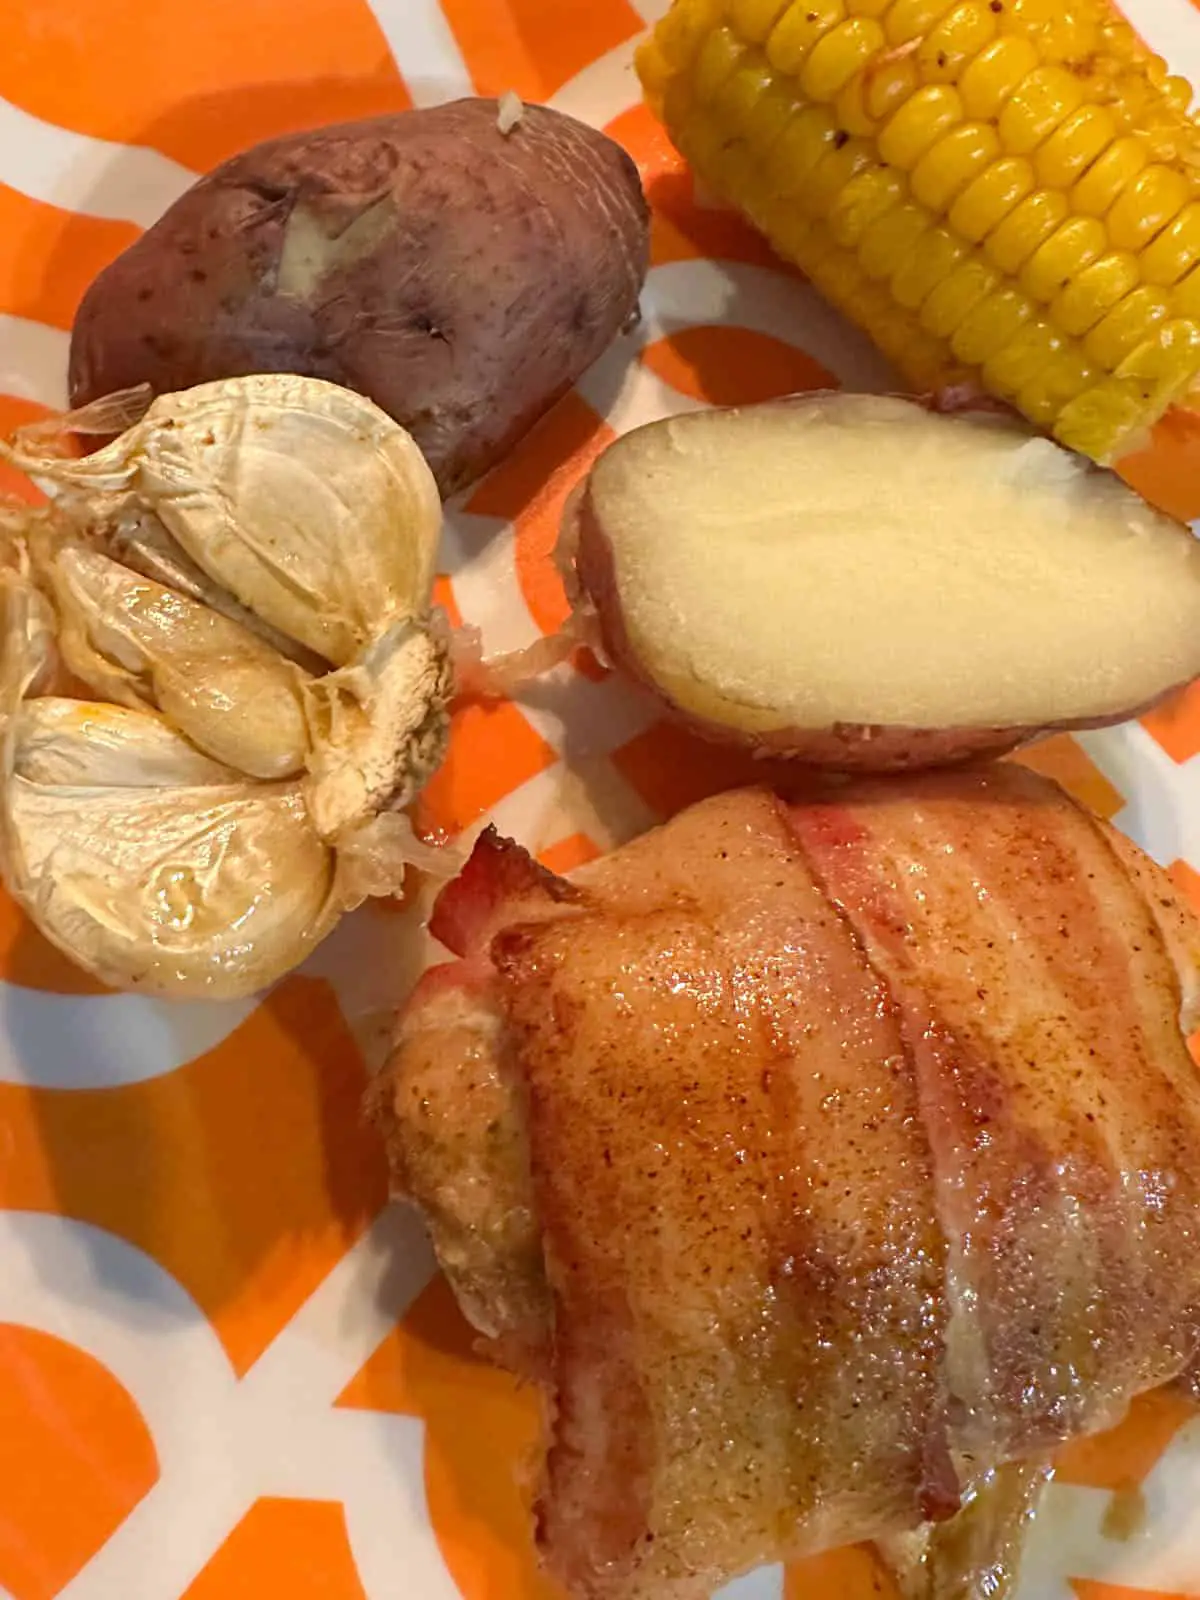 Chicken armadillo egg, half a bulb of garlic, halves of a red potato and some corn on an orange and white plate.